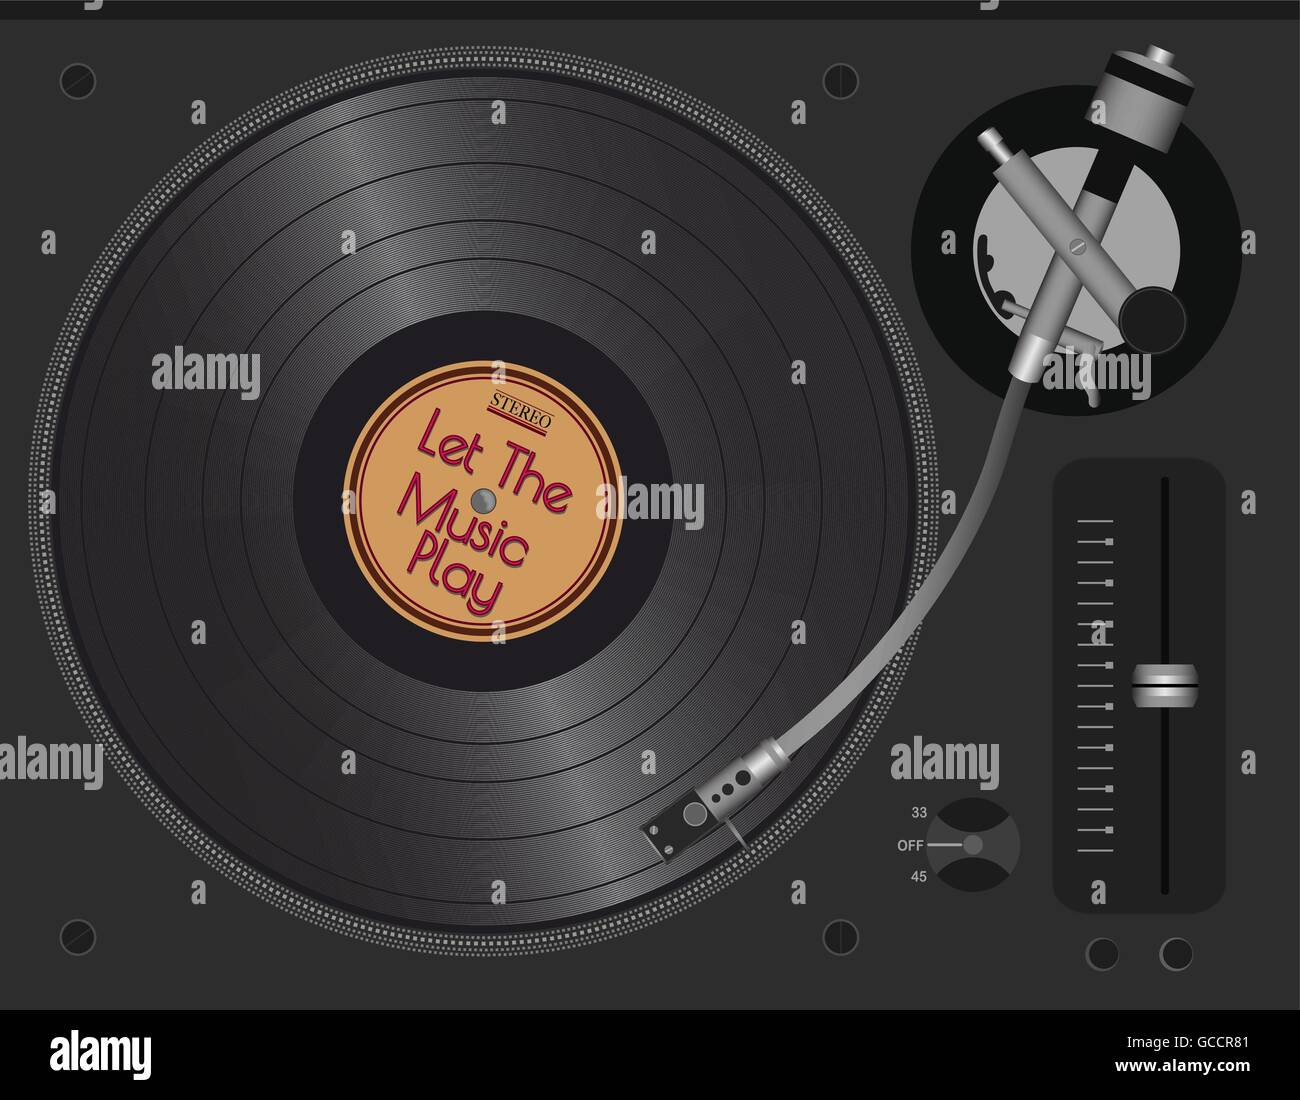 Dj Turntable With LP. Vector Illustration eps10 Stock Vector